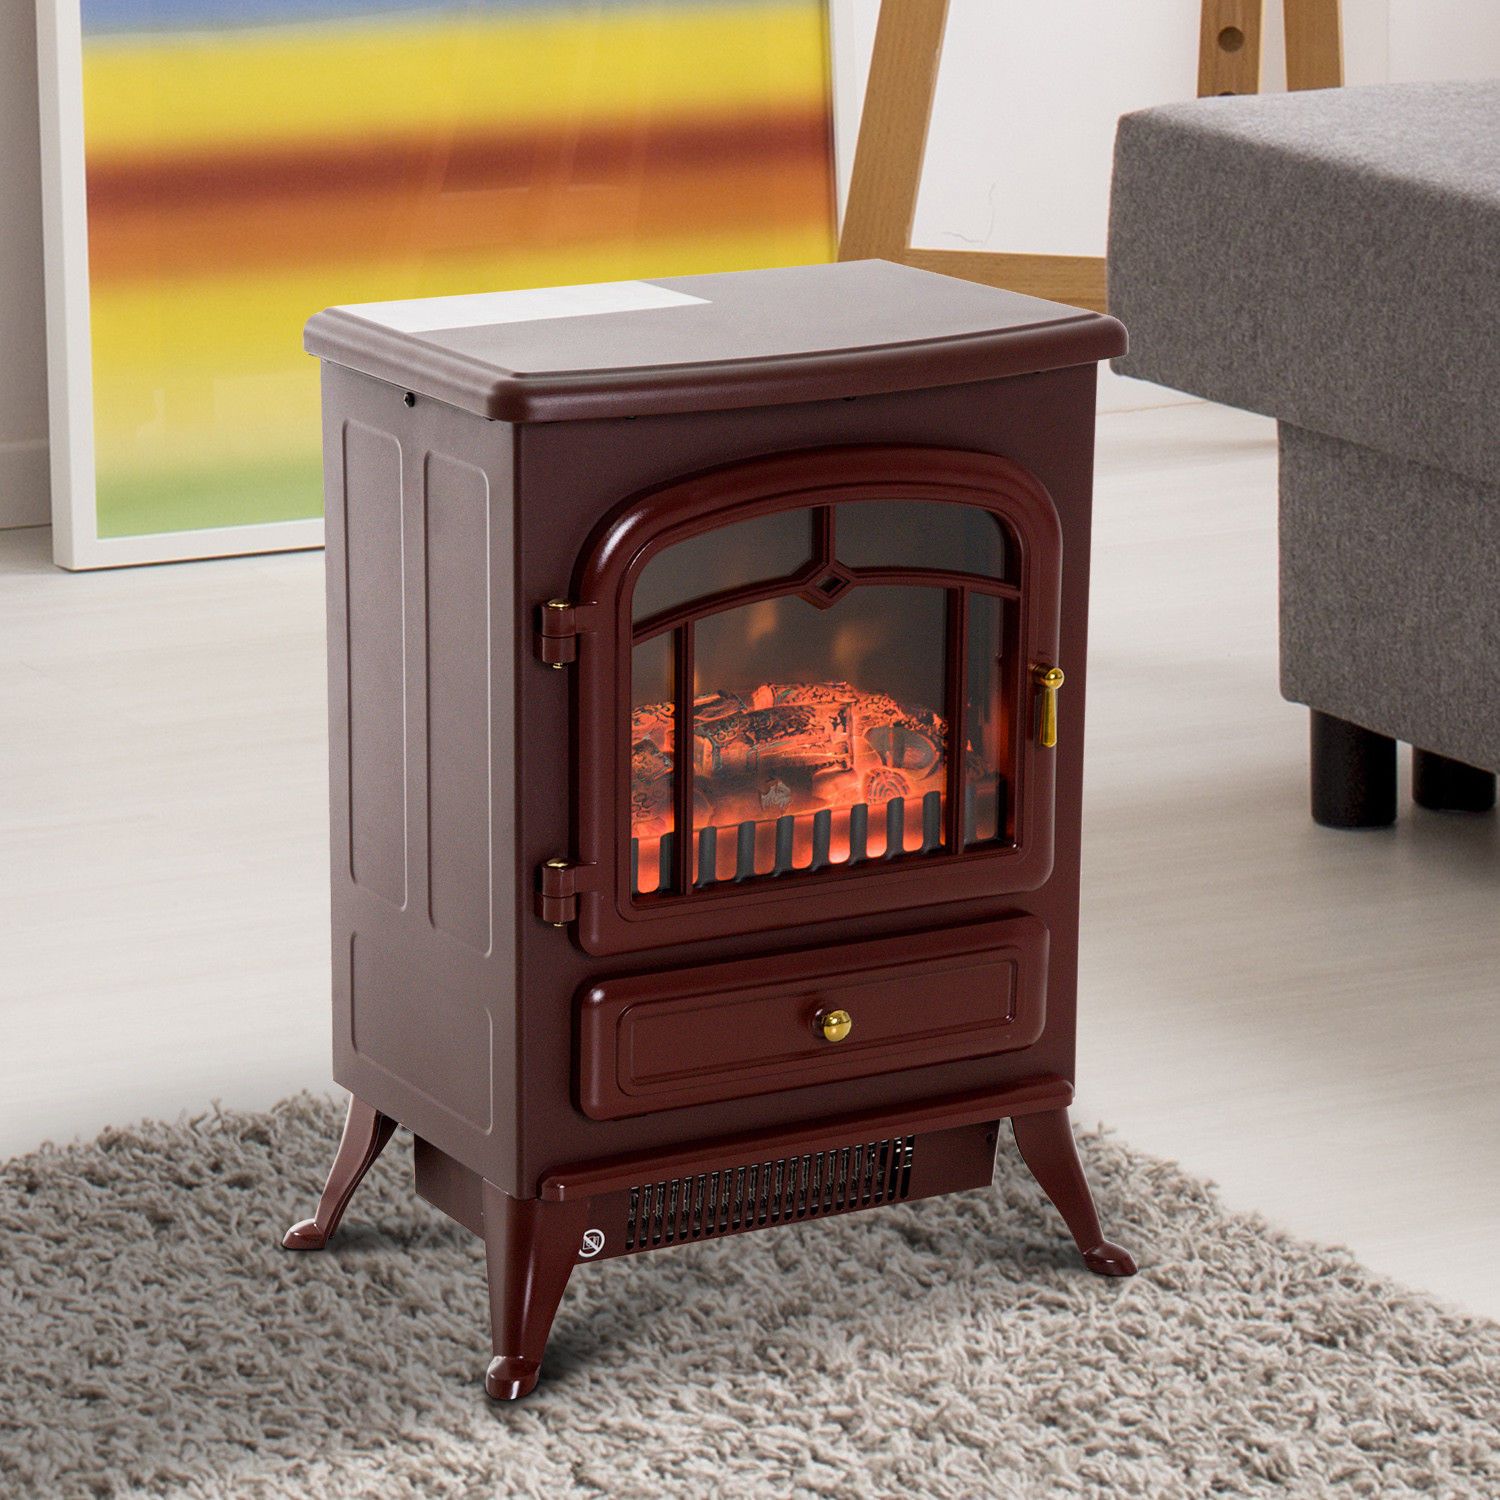 Small Gas Fireplace Stove New Hom 16” 1500 Watt Free Standing Electric Wood Stove